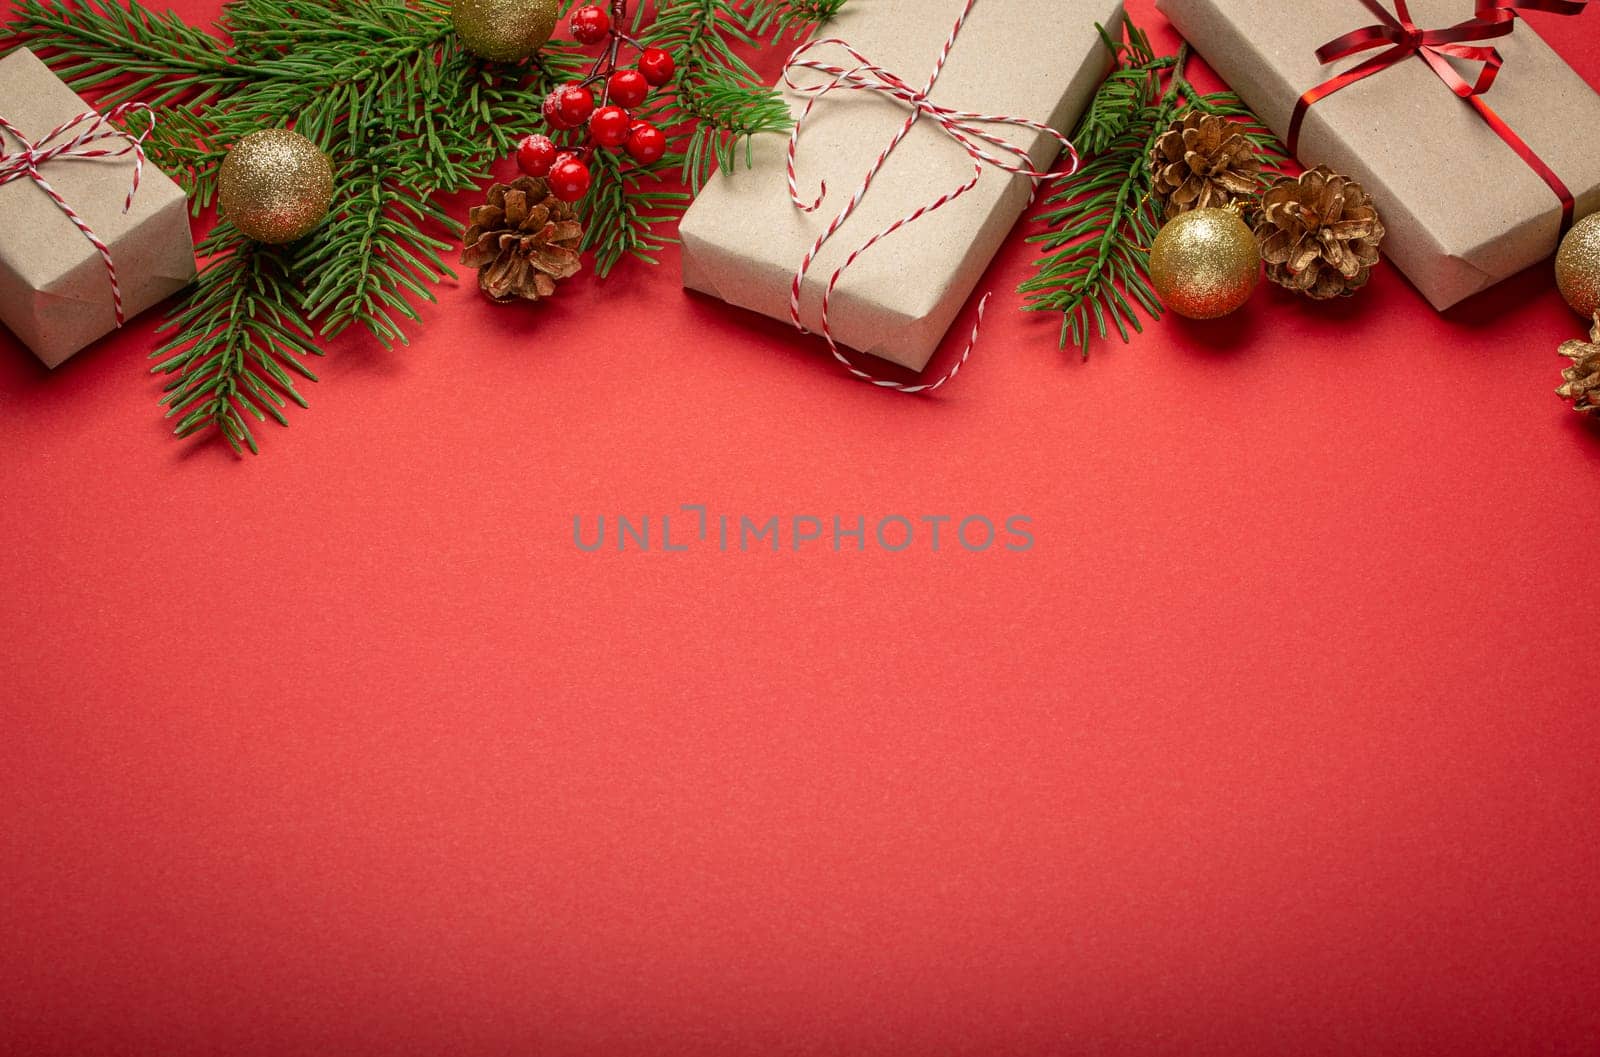 Christmas or New Year celebration red paper festive background with decoration fir tree, wrapped present boxes, cones, berries, sparkly red balls. Space for text..